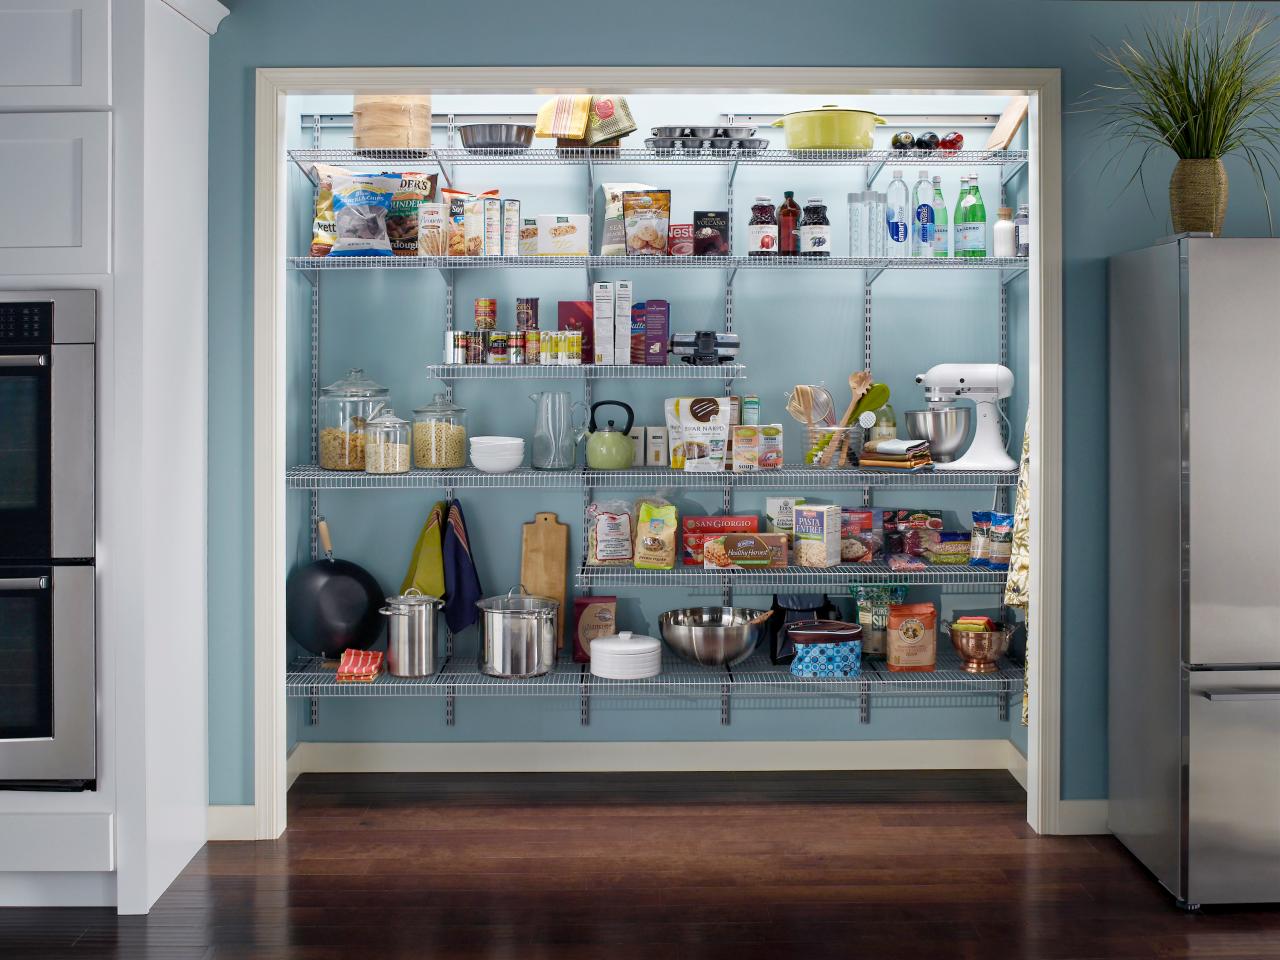 Adjustable wire shelving is an inexpensive product for customizing your pantry space.